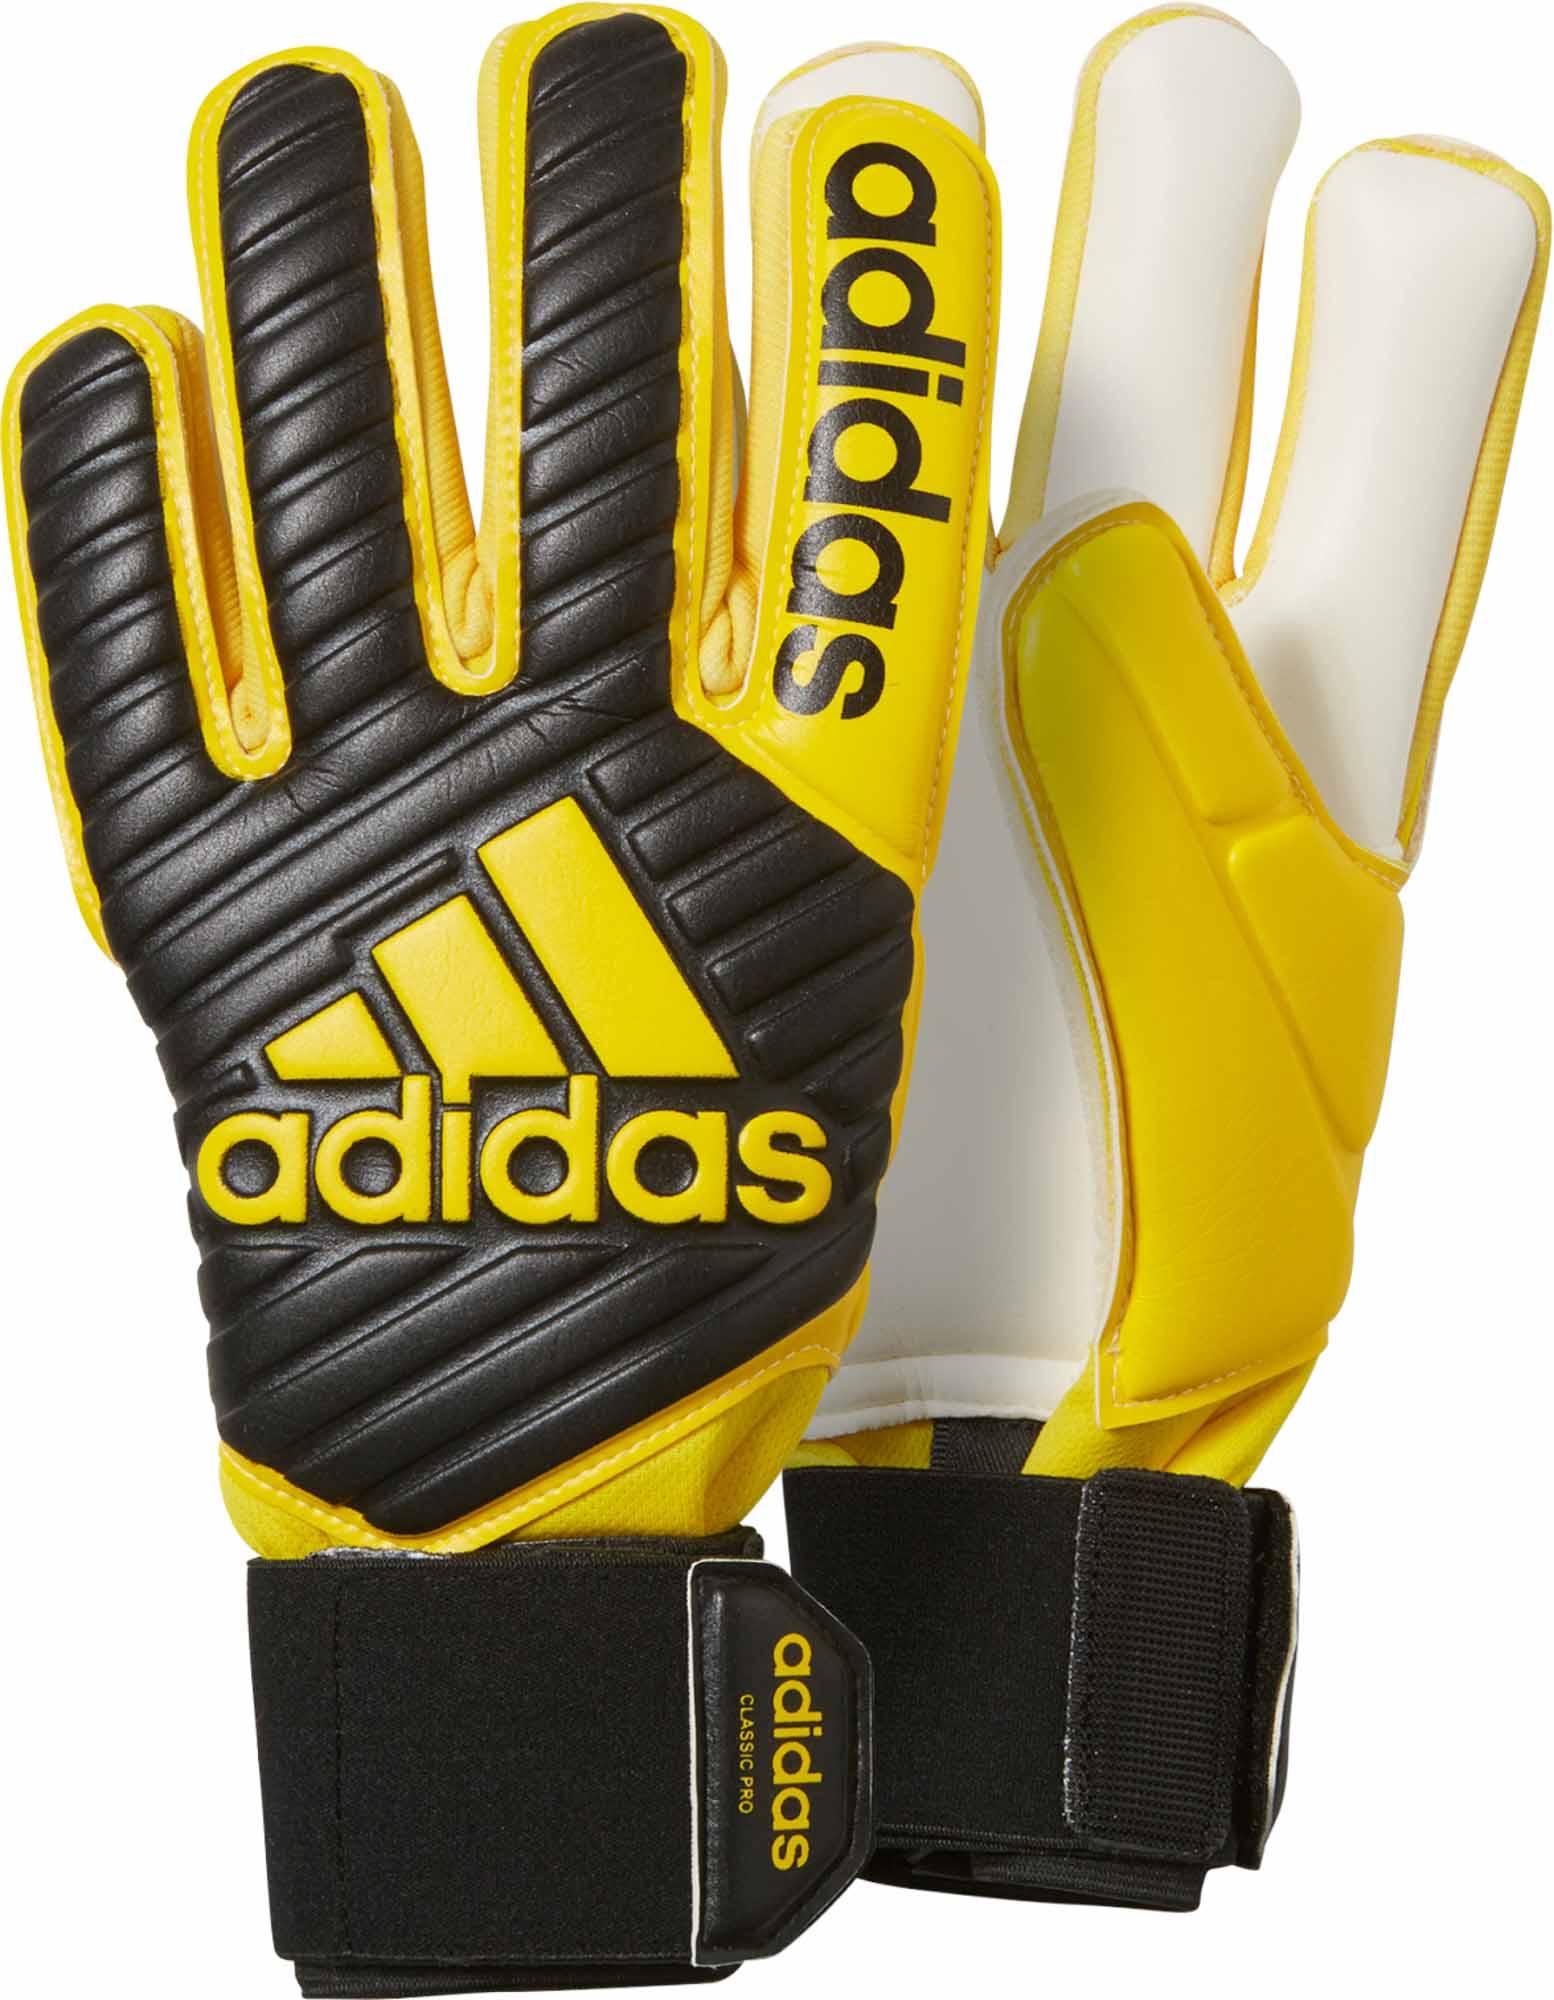 Black and Yellow adidas Classic Pro 